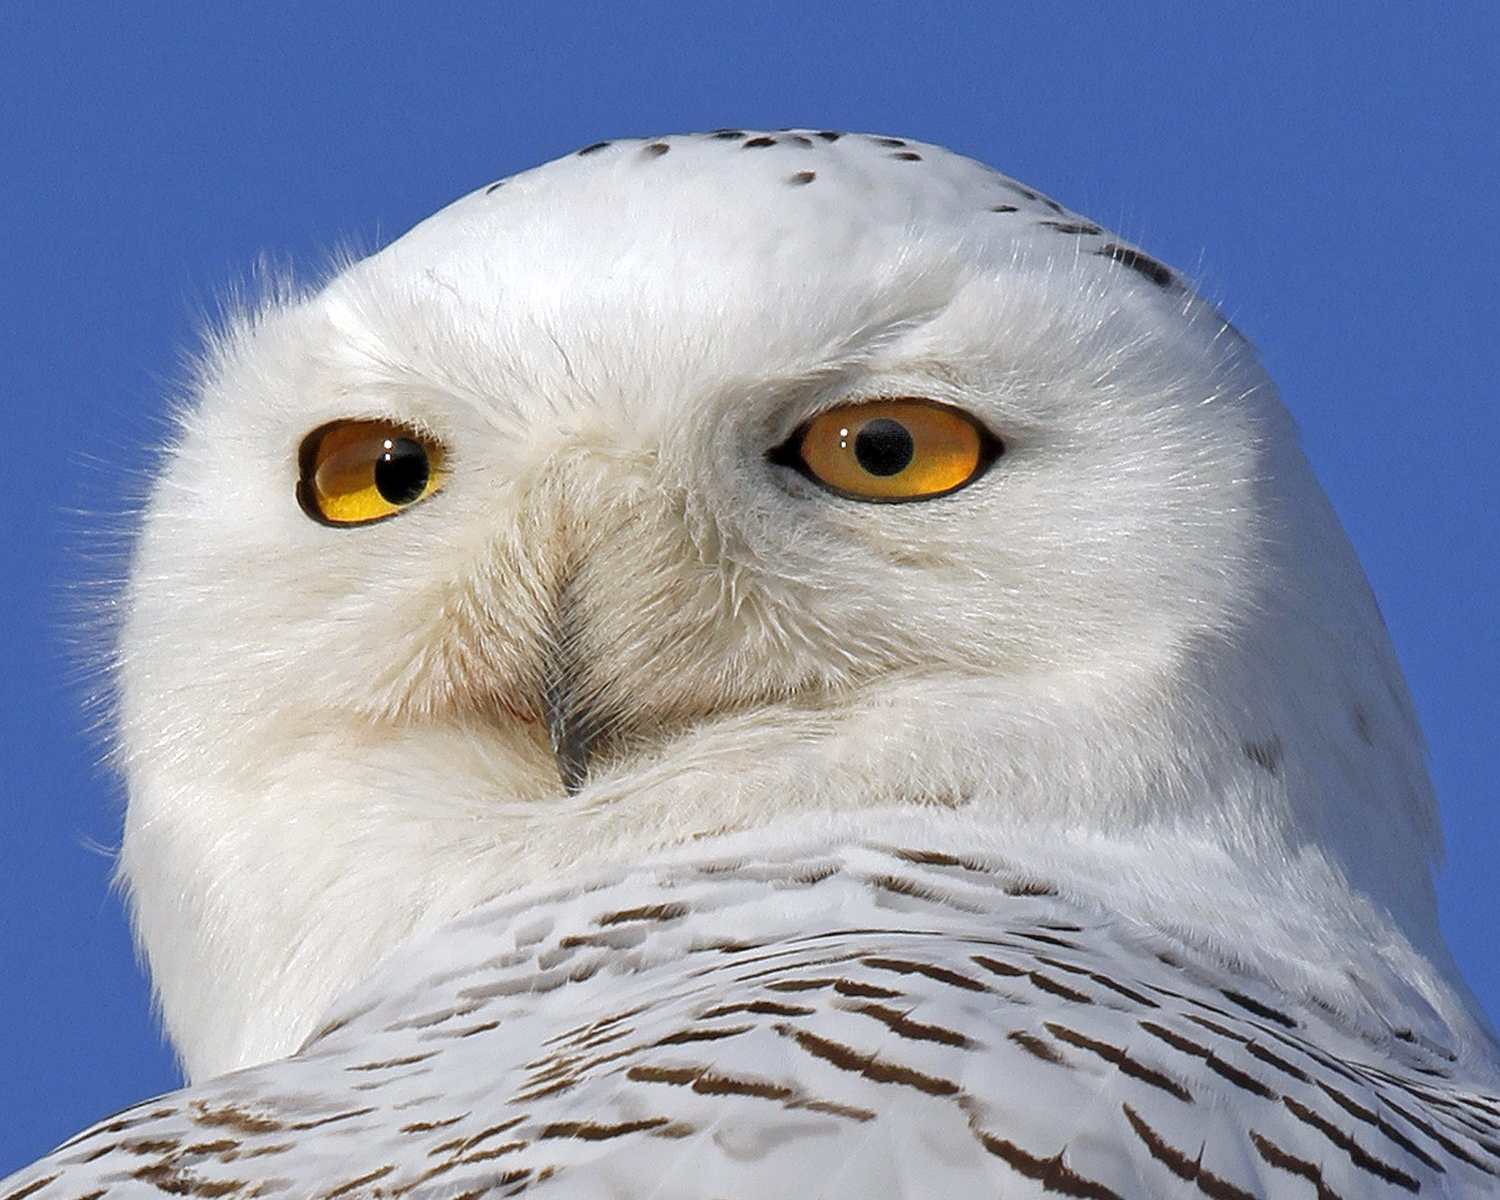 Snowy Owl Portrait (user submitted)